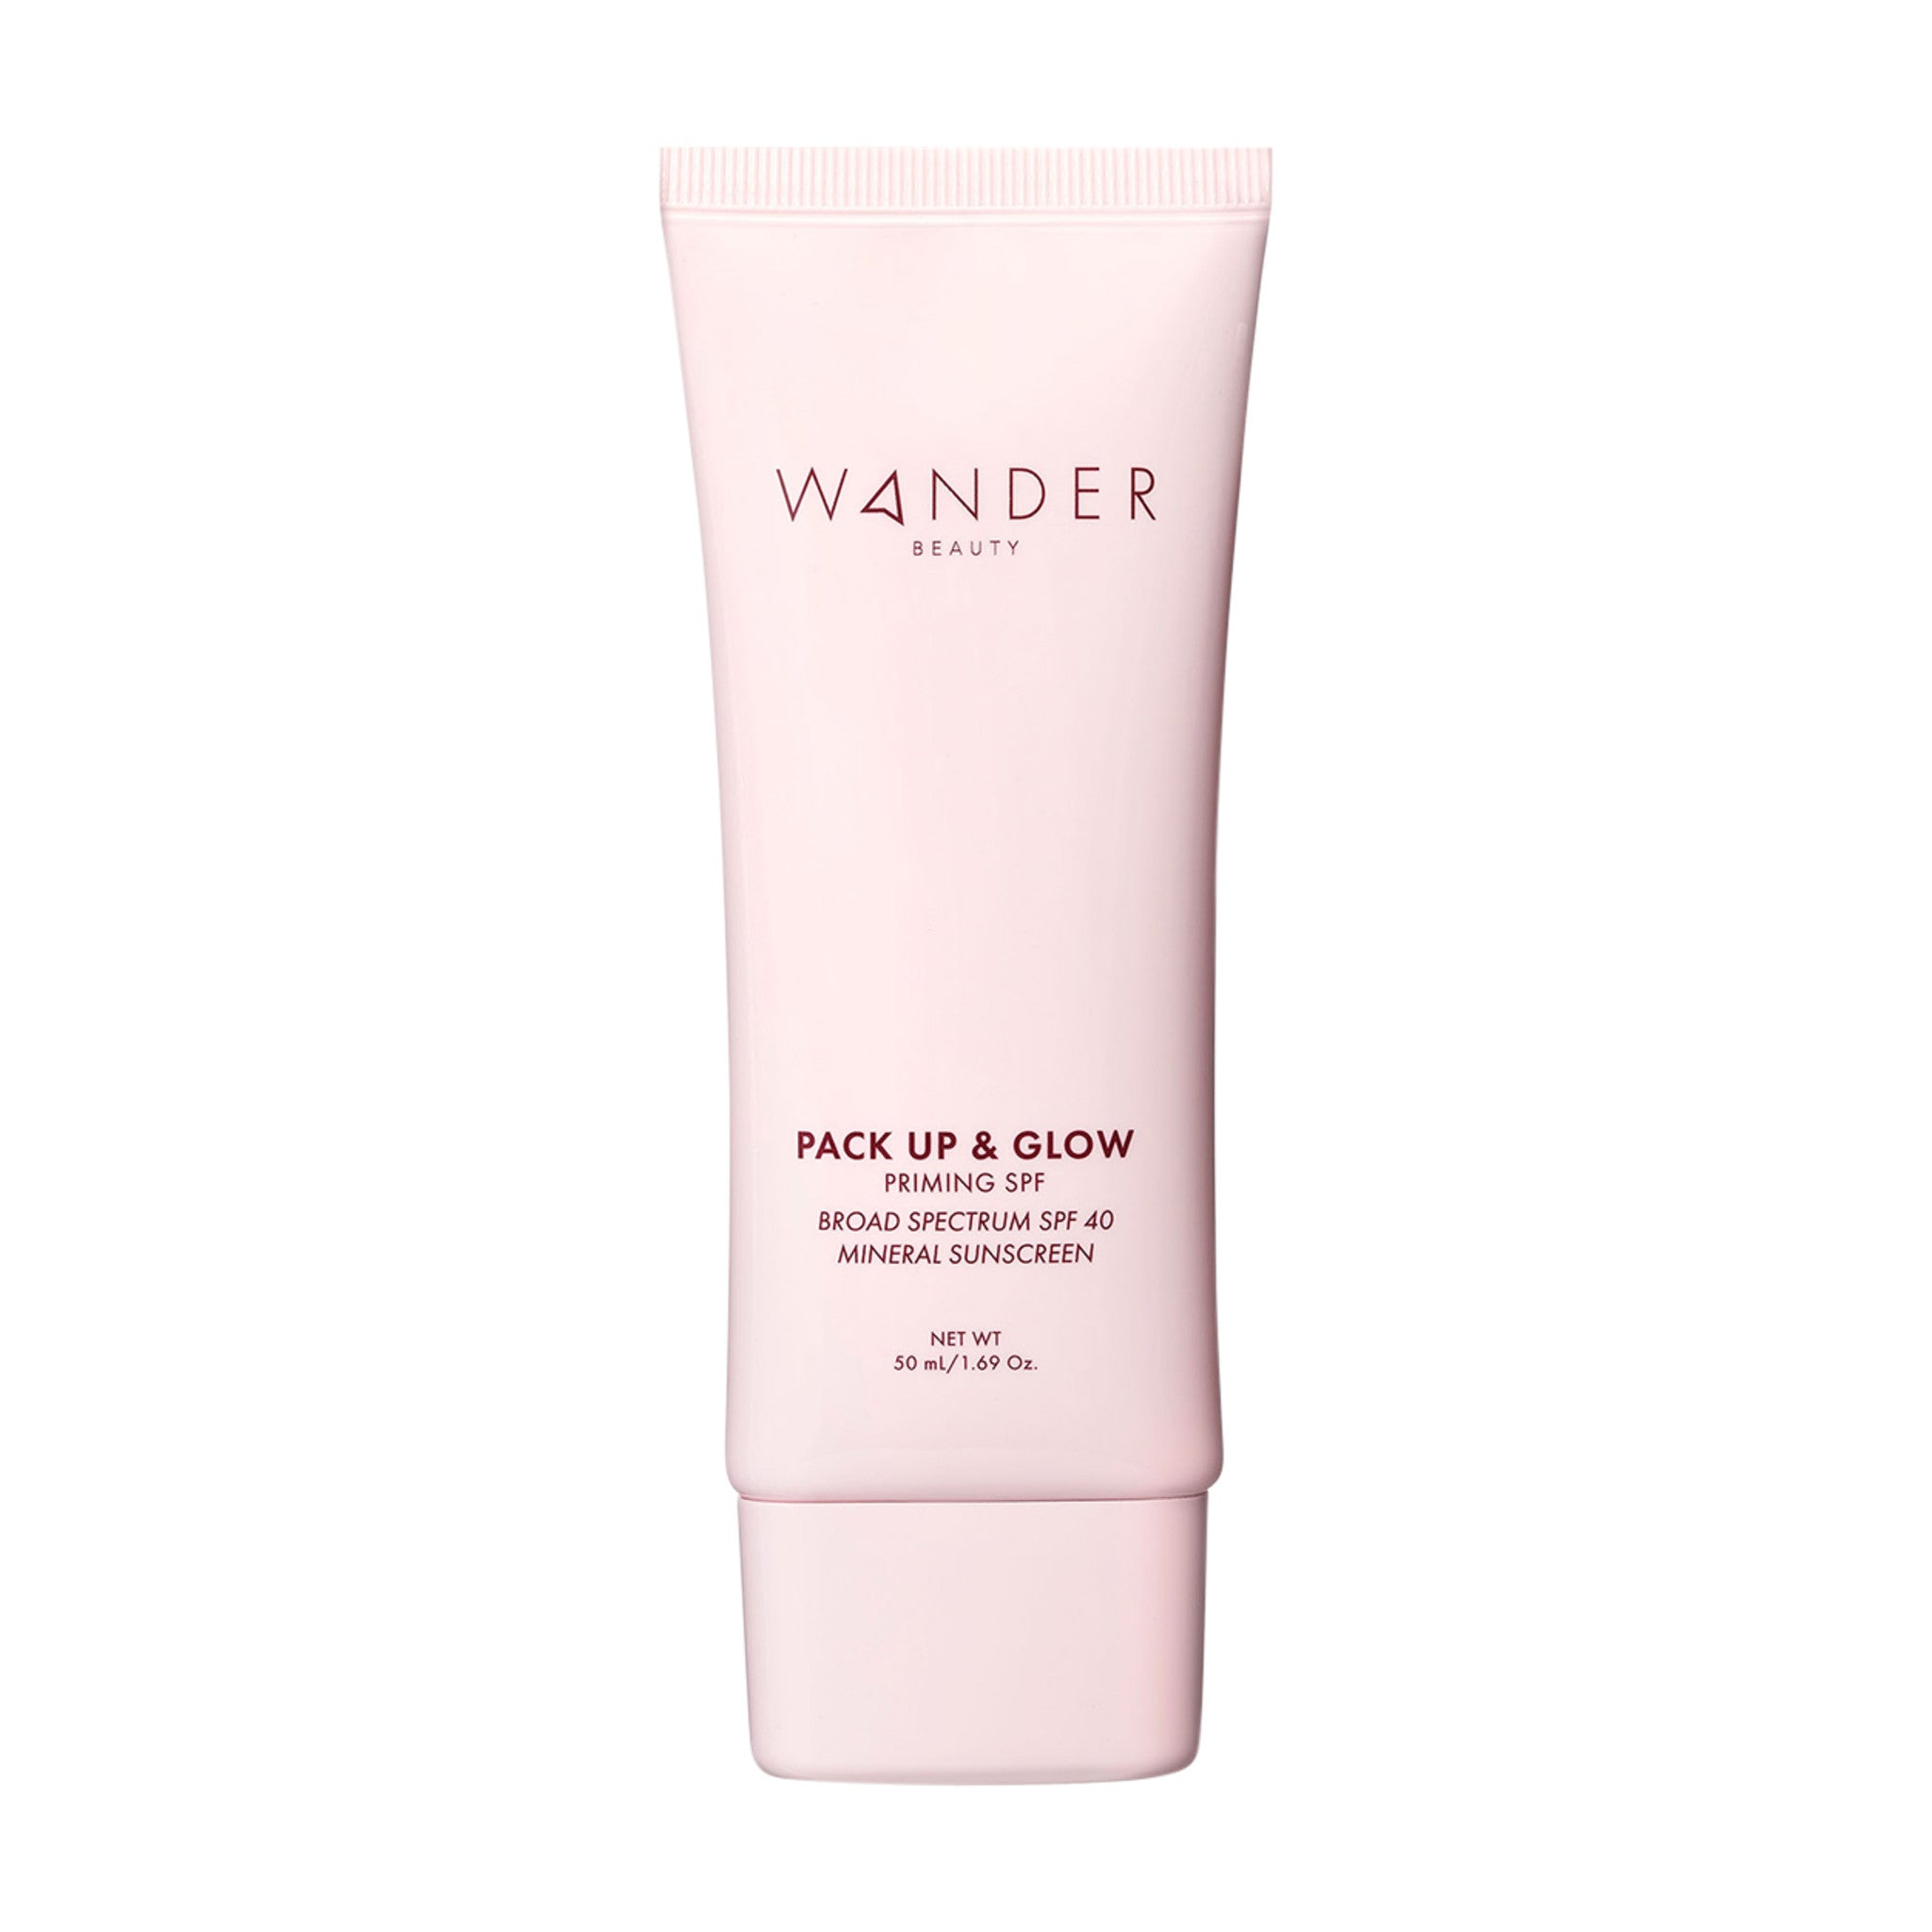 Wander Beauty Pack Up and Glow Priming Mineral SPF 40 main image.